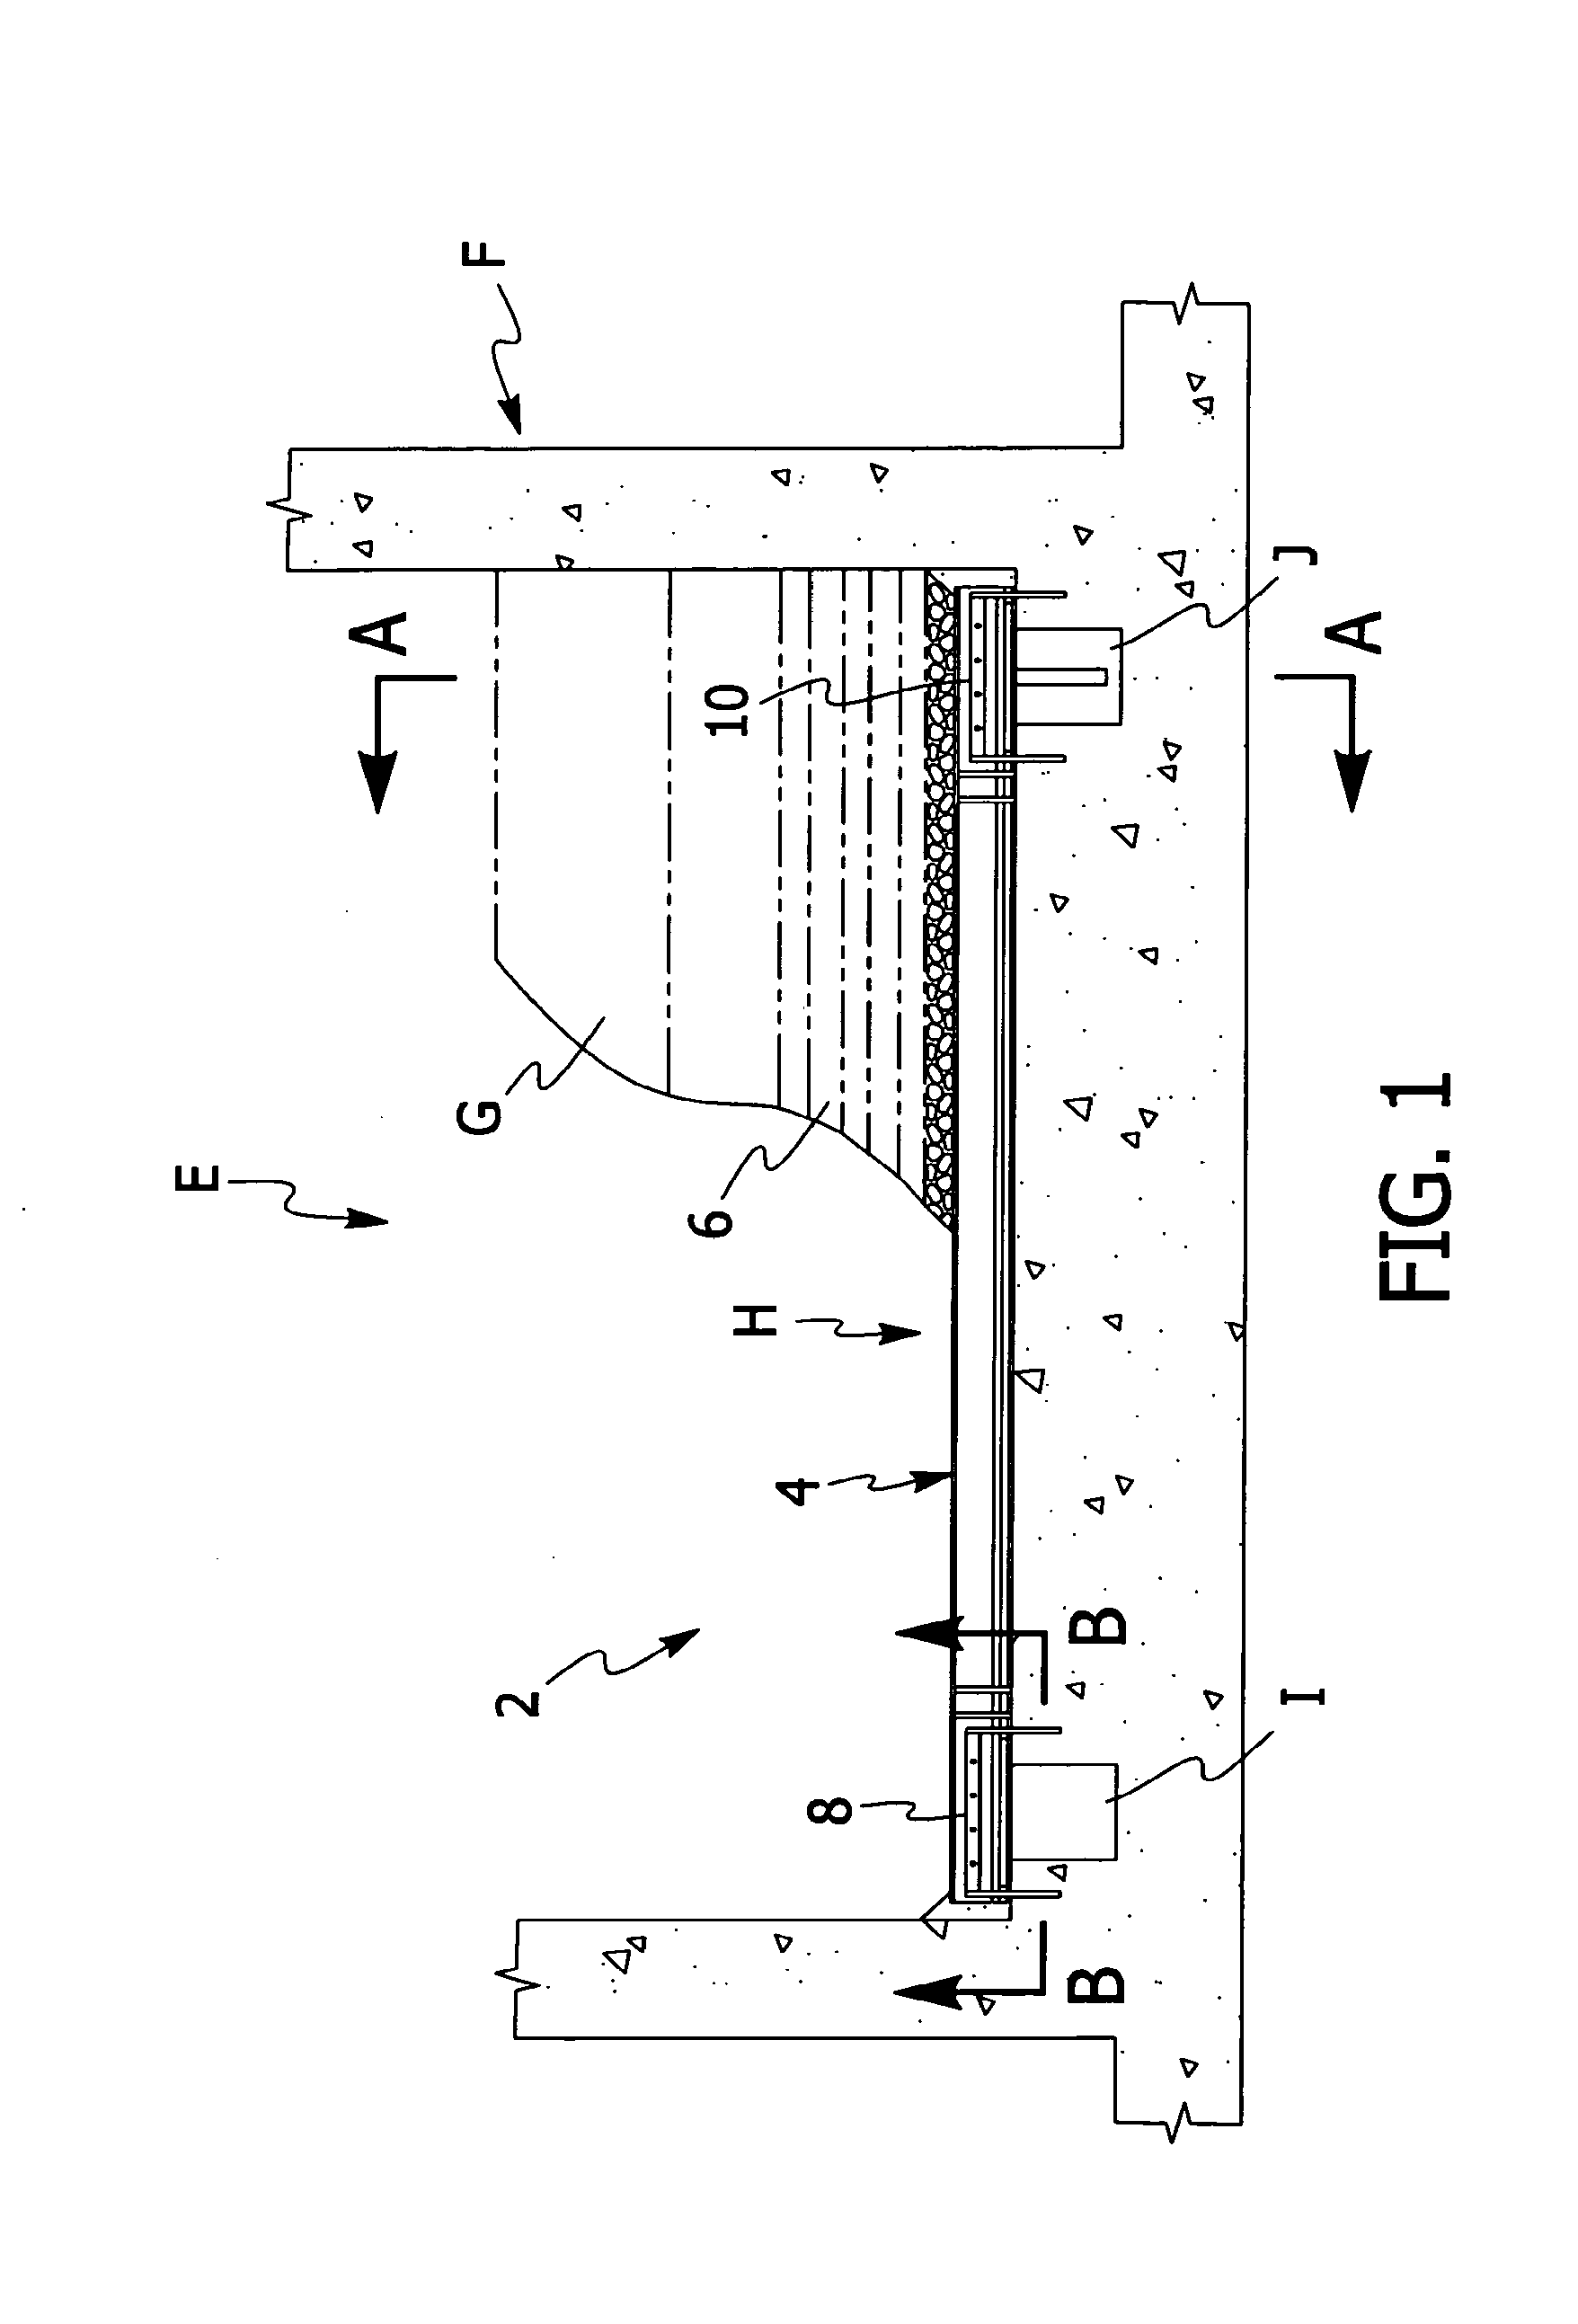 Flume system for a filter system including at least one filter having a filter bed that is periodically washed with liquid, gas or a combination thereof